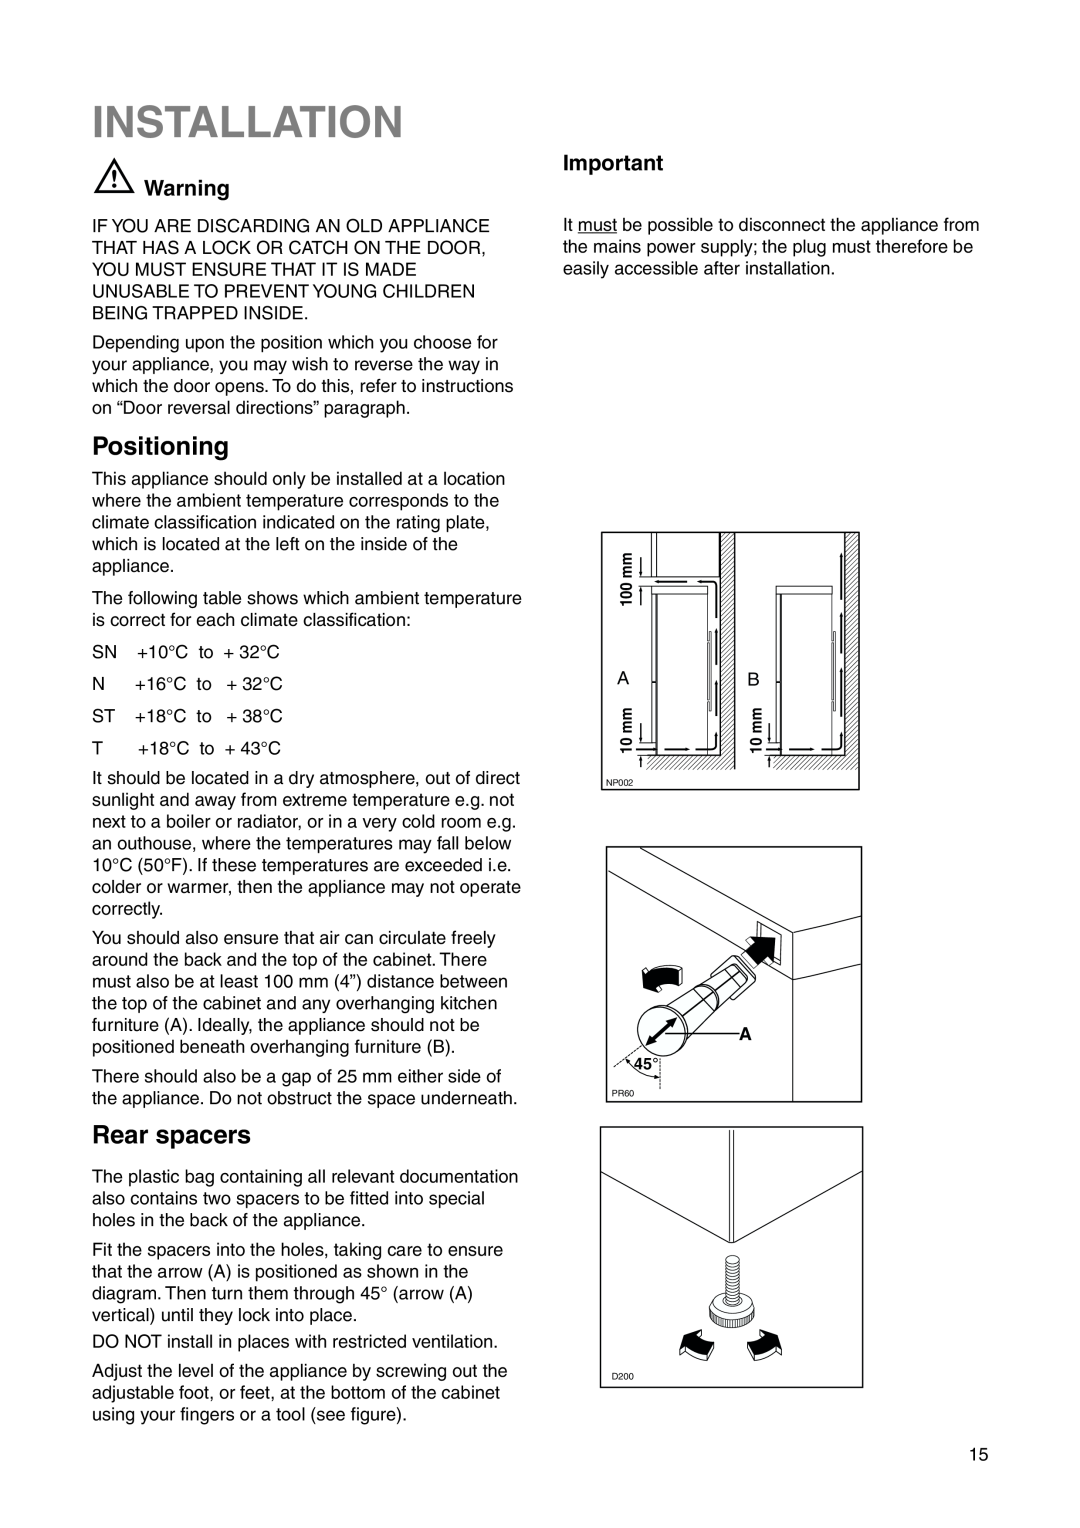 Zanussi ZRB 2925 S manual Installation, Positioning, Rear spacers 